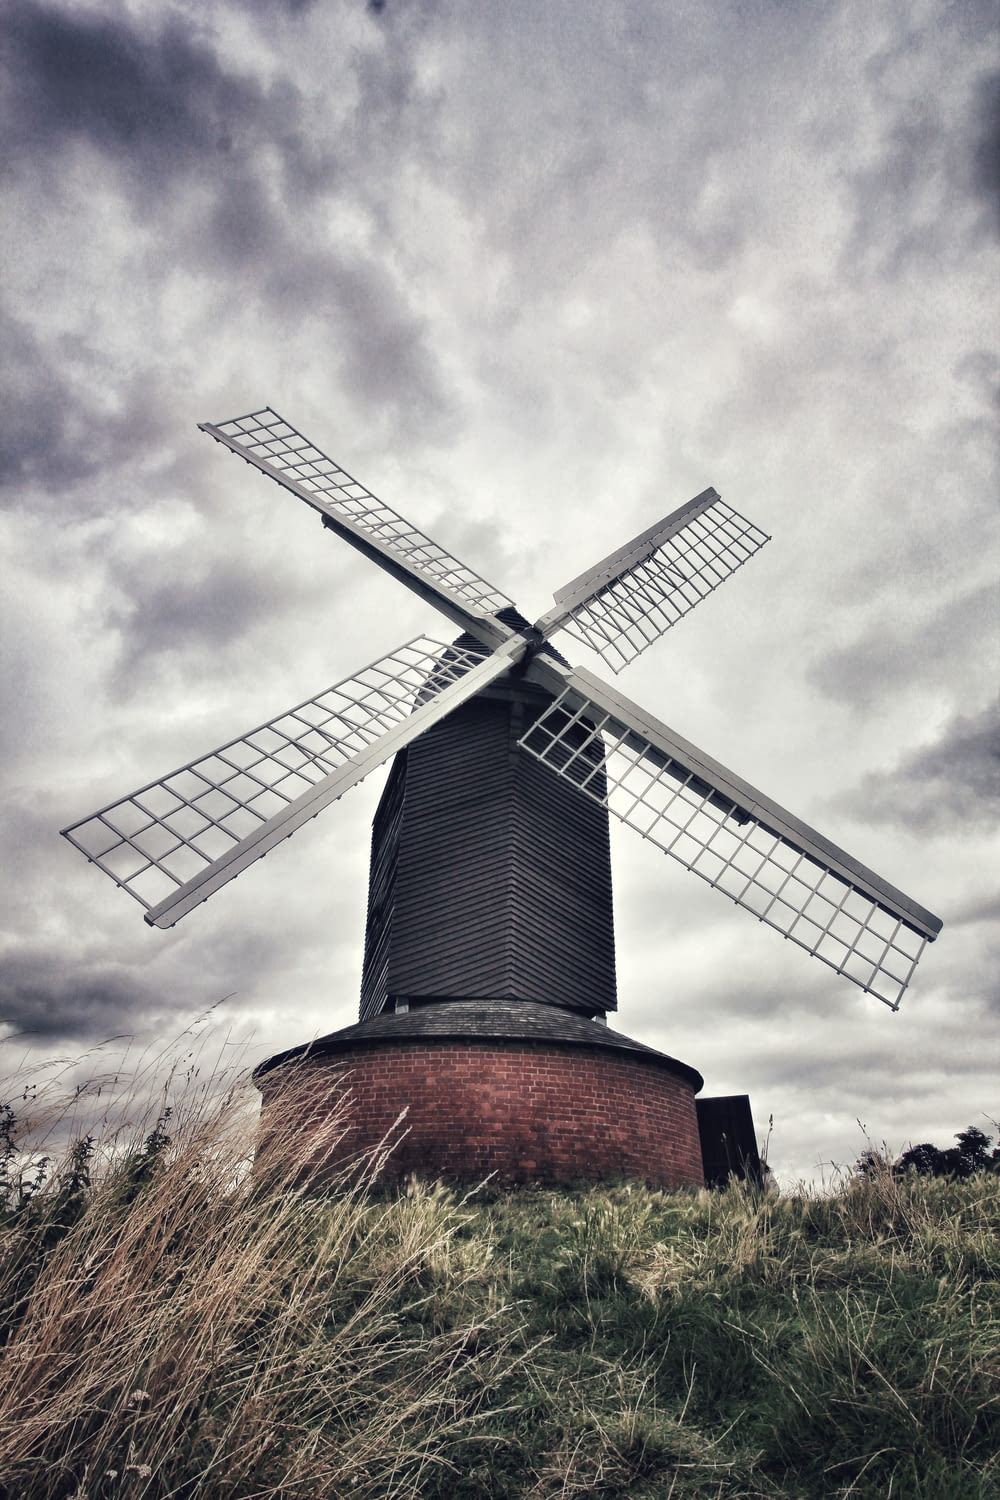 brown and gray windmill under cloudy sky during daytime